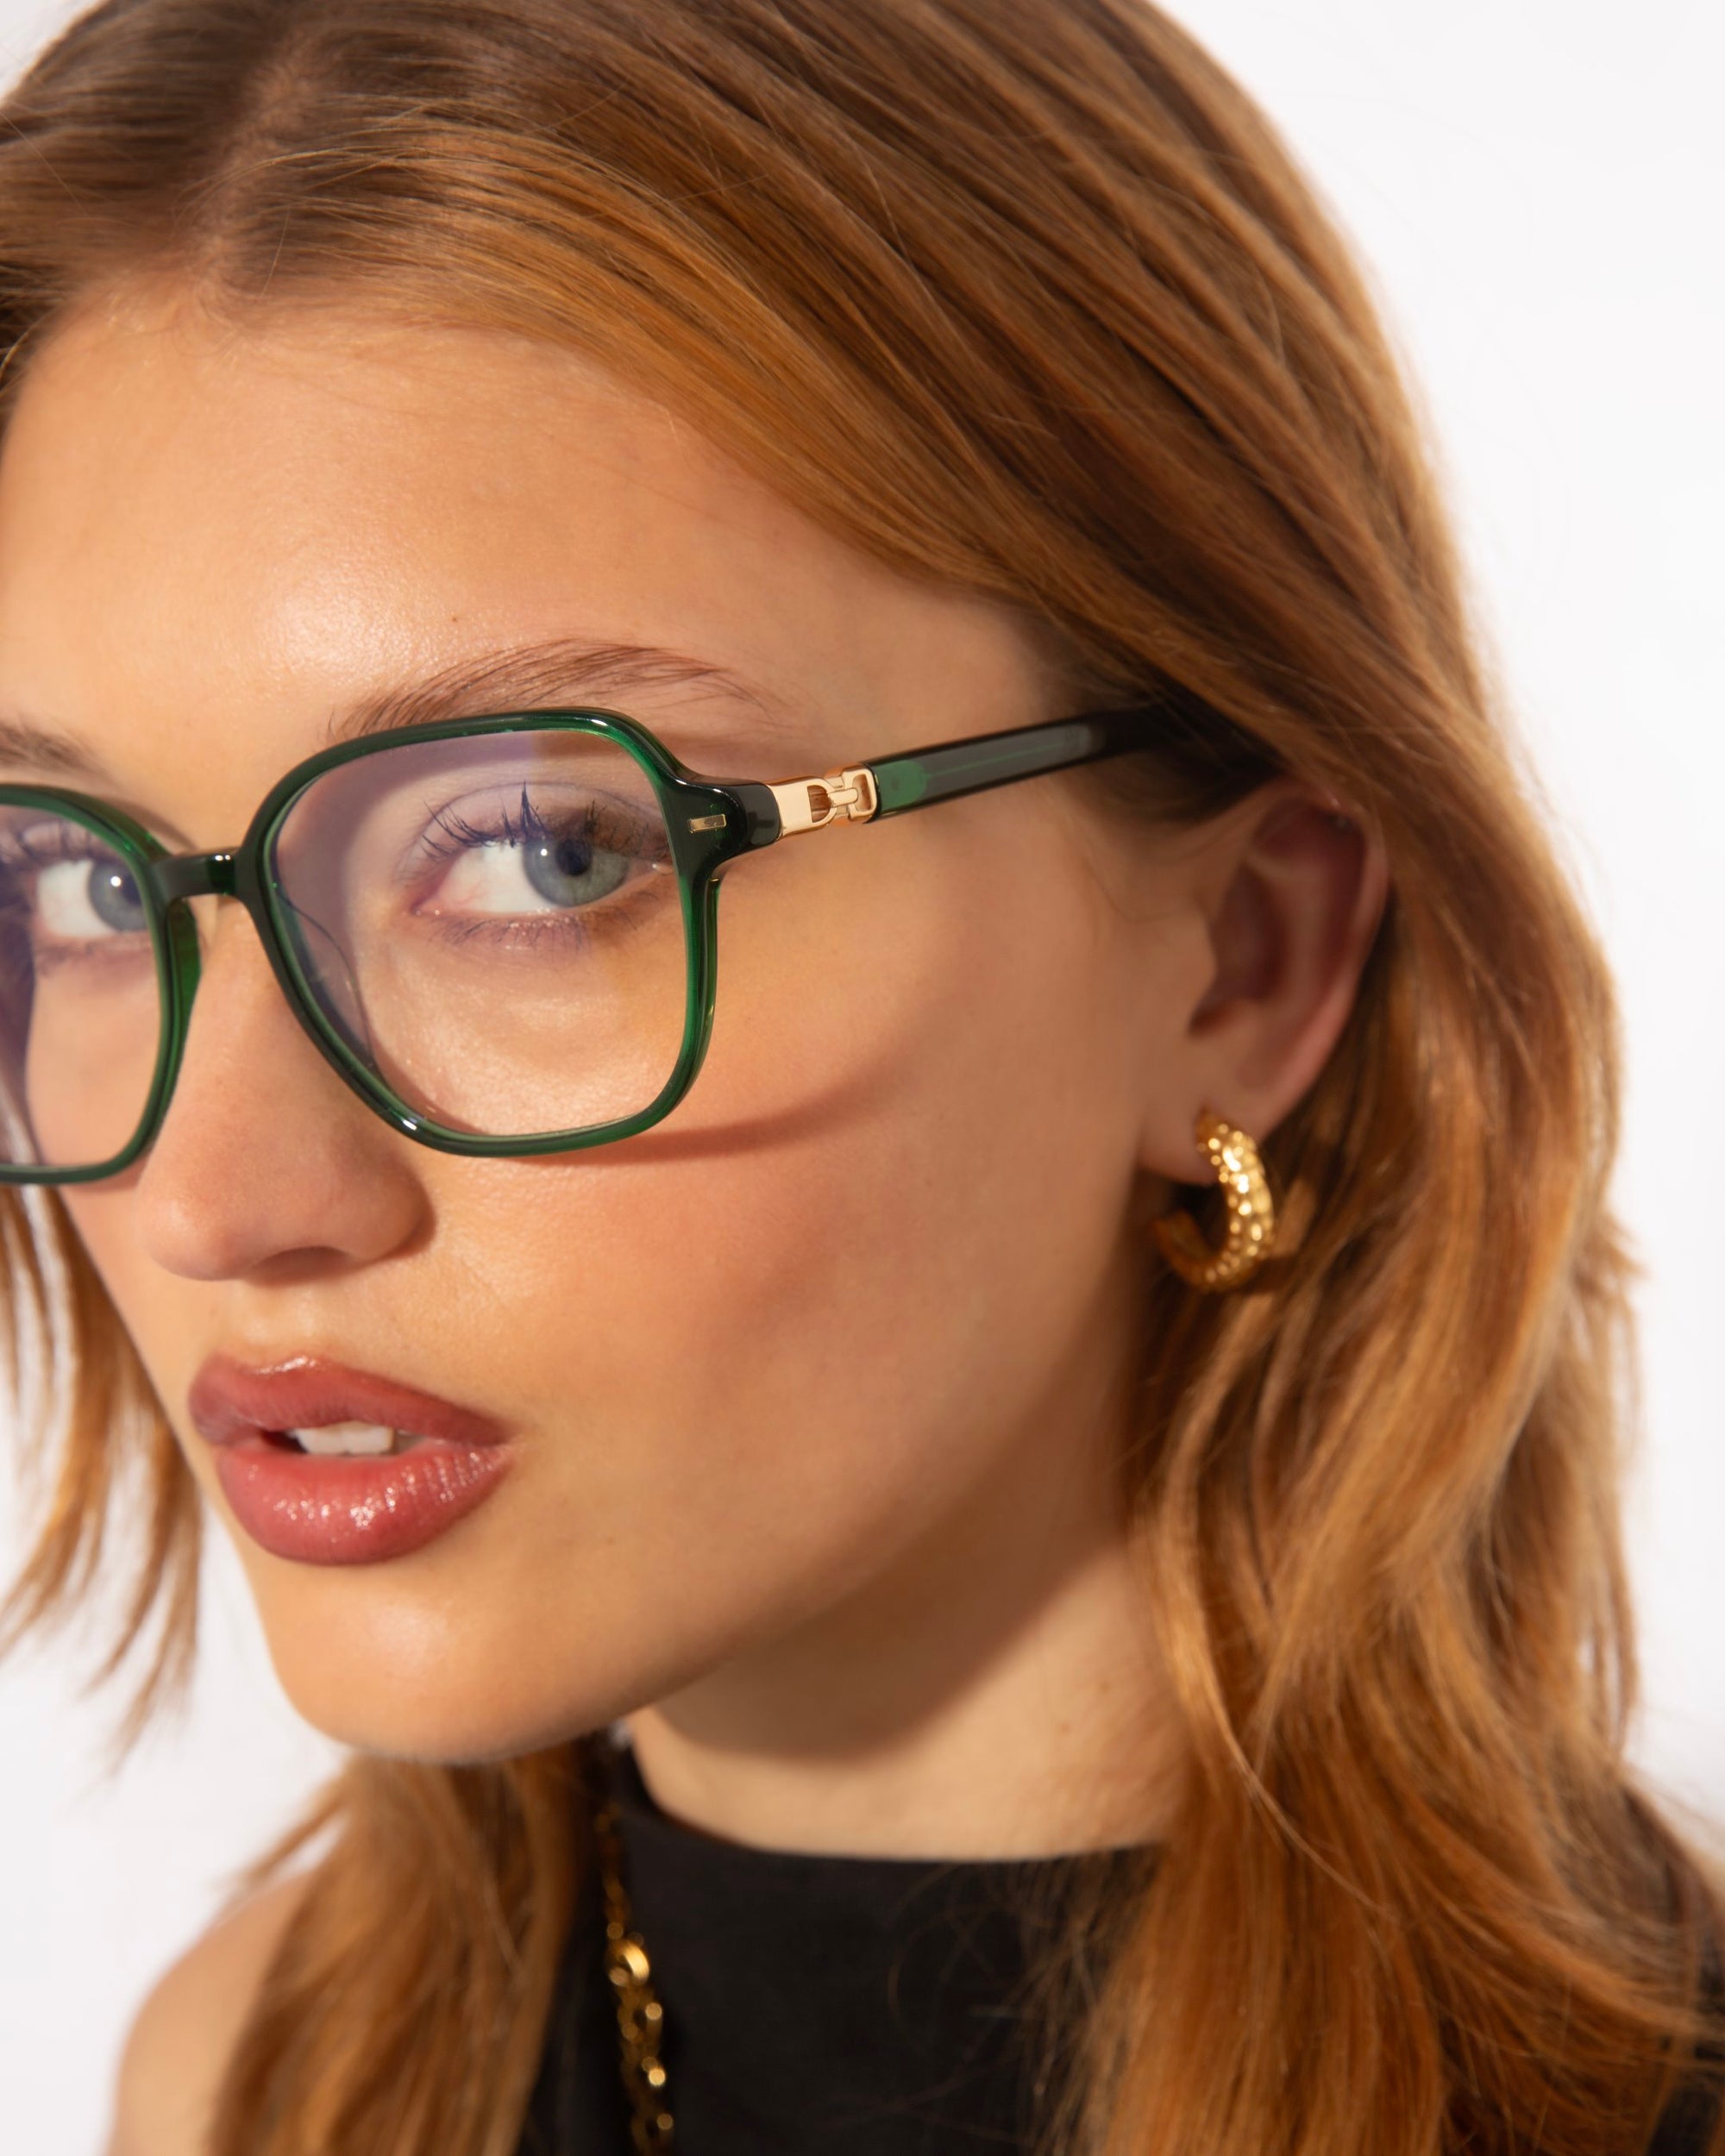 A person with long, light brown hair wears large, green-framed For Art&#39;s Sake® Charm cat-eye shaped glasses and hoop earrings. They have a neutral expression and are looking at the camera. The background is plain white.